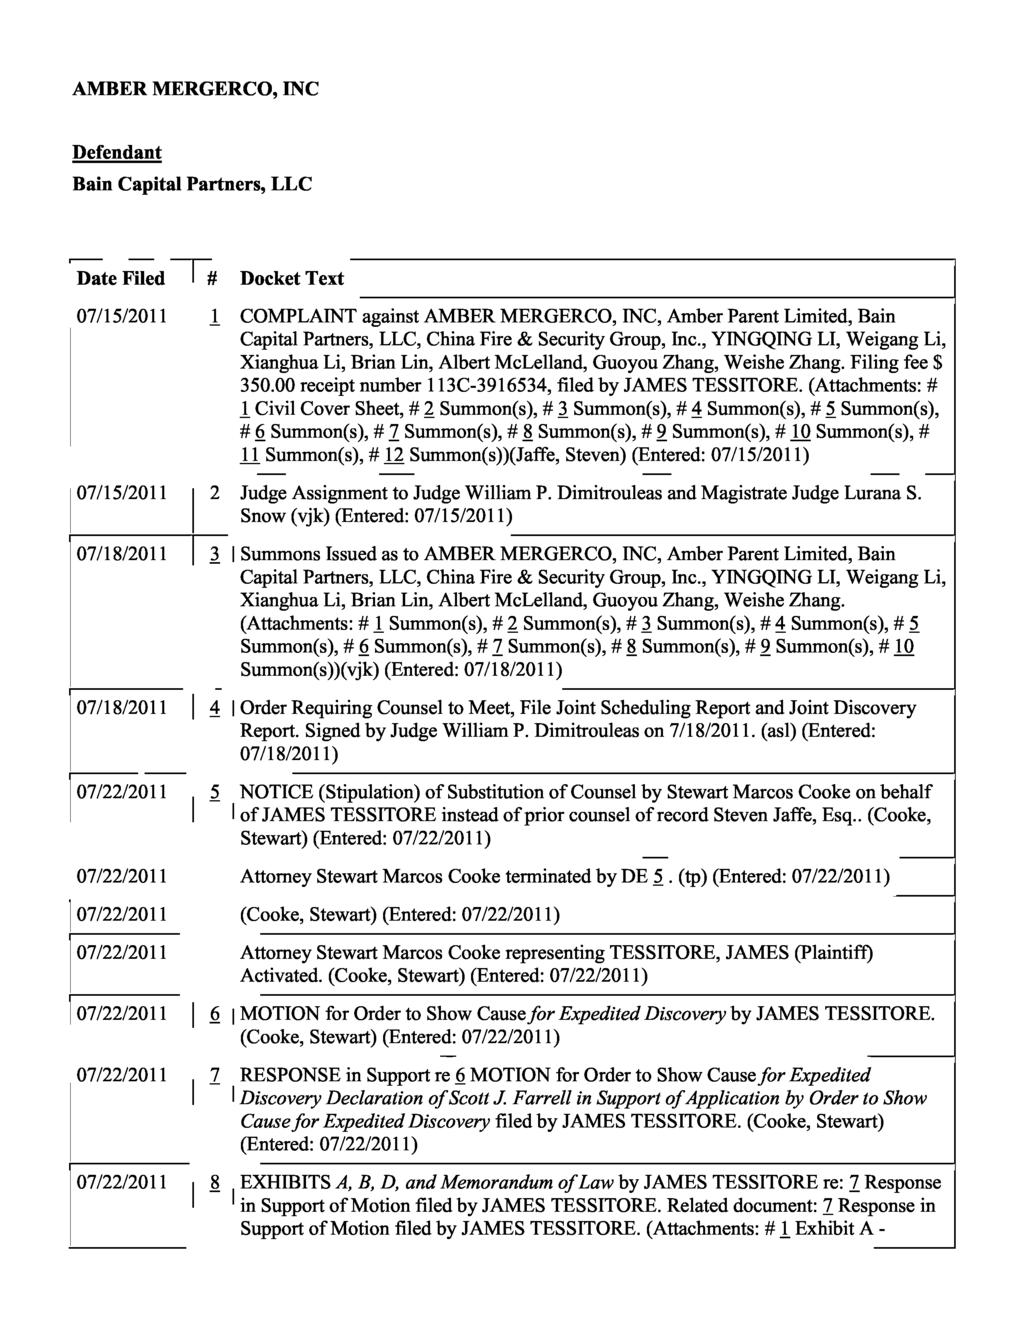 AMBER MERGERCO, INC Bain Capital Partners, LLC Date Filed # Docket Text 07/15/2011 1 COMPLAINT against AMBER MERGERCO, INC, Amber Parent Limited, Bain Capital Partners, LLC, China Fire & Security